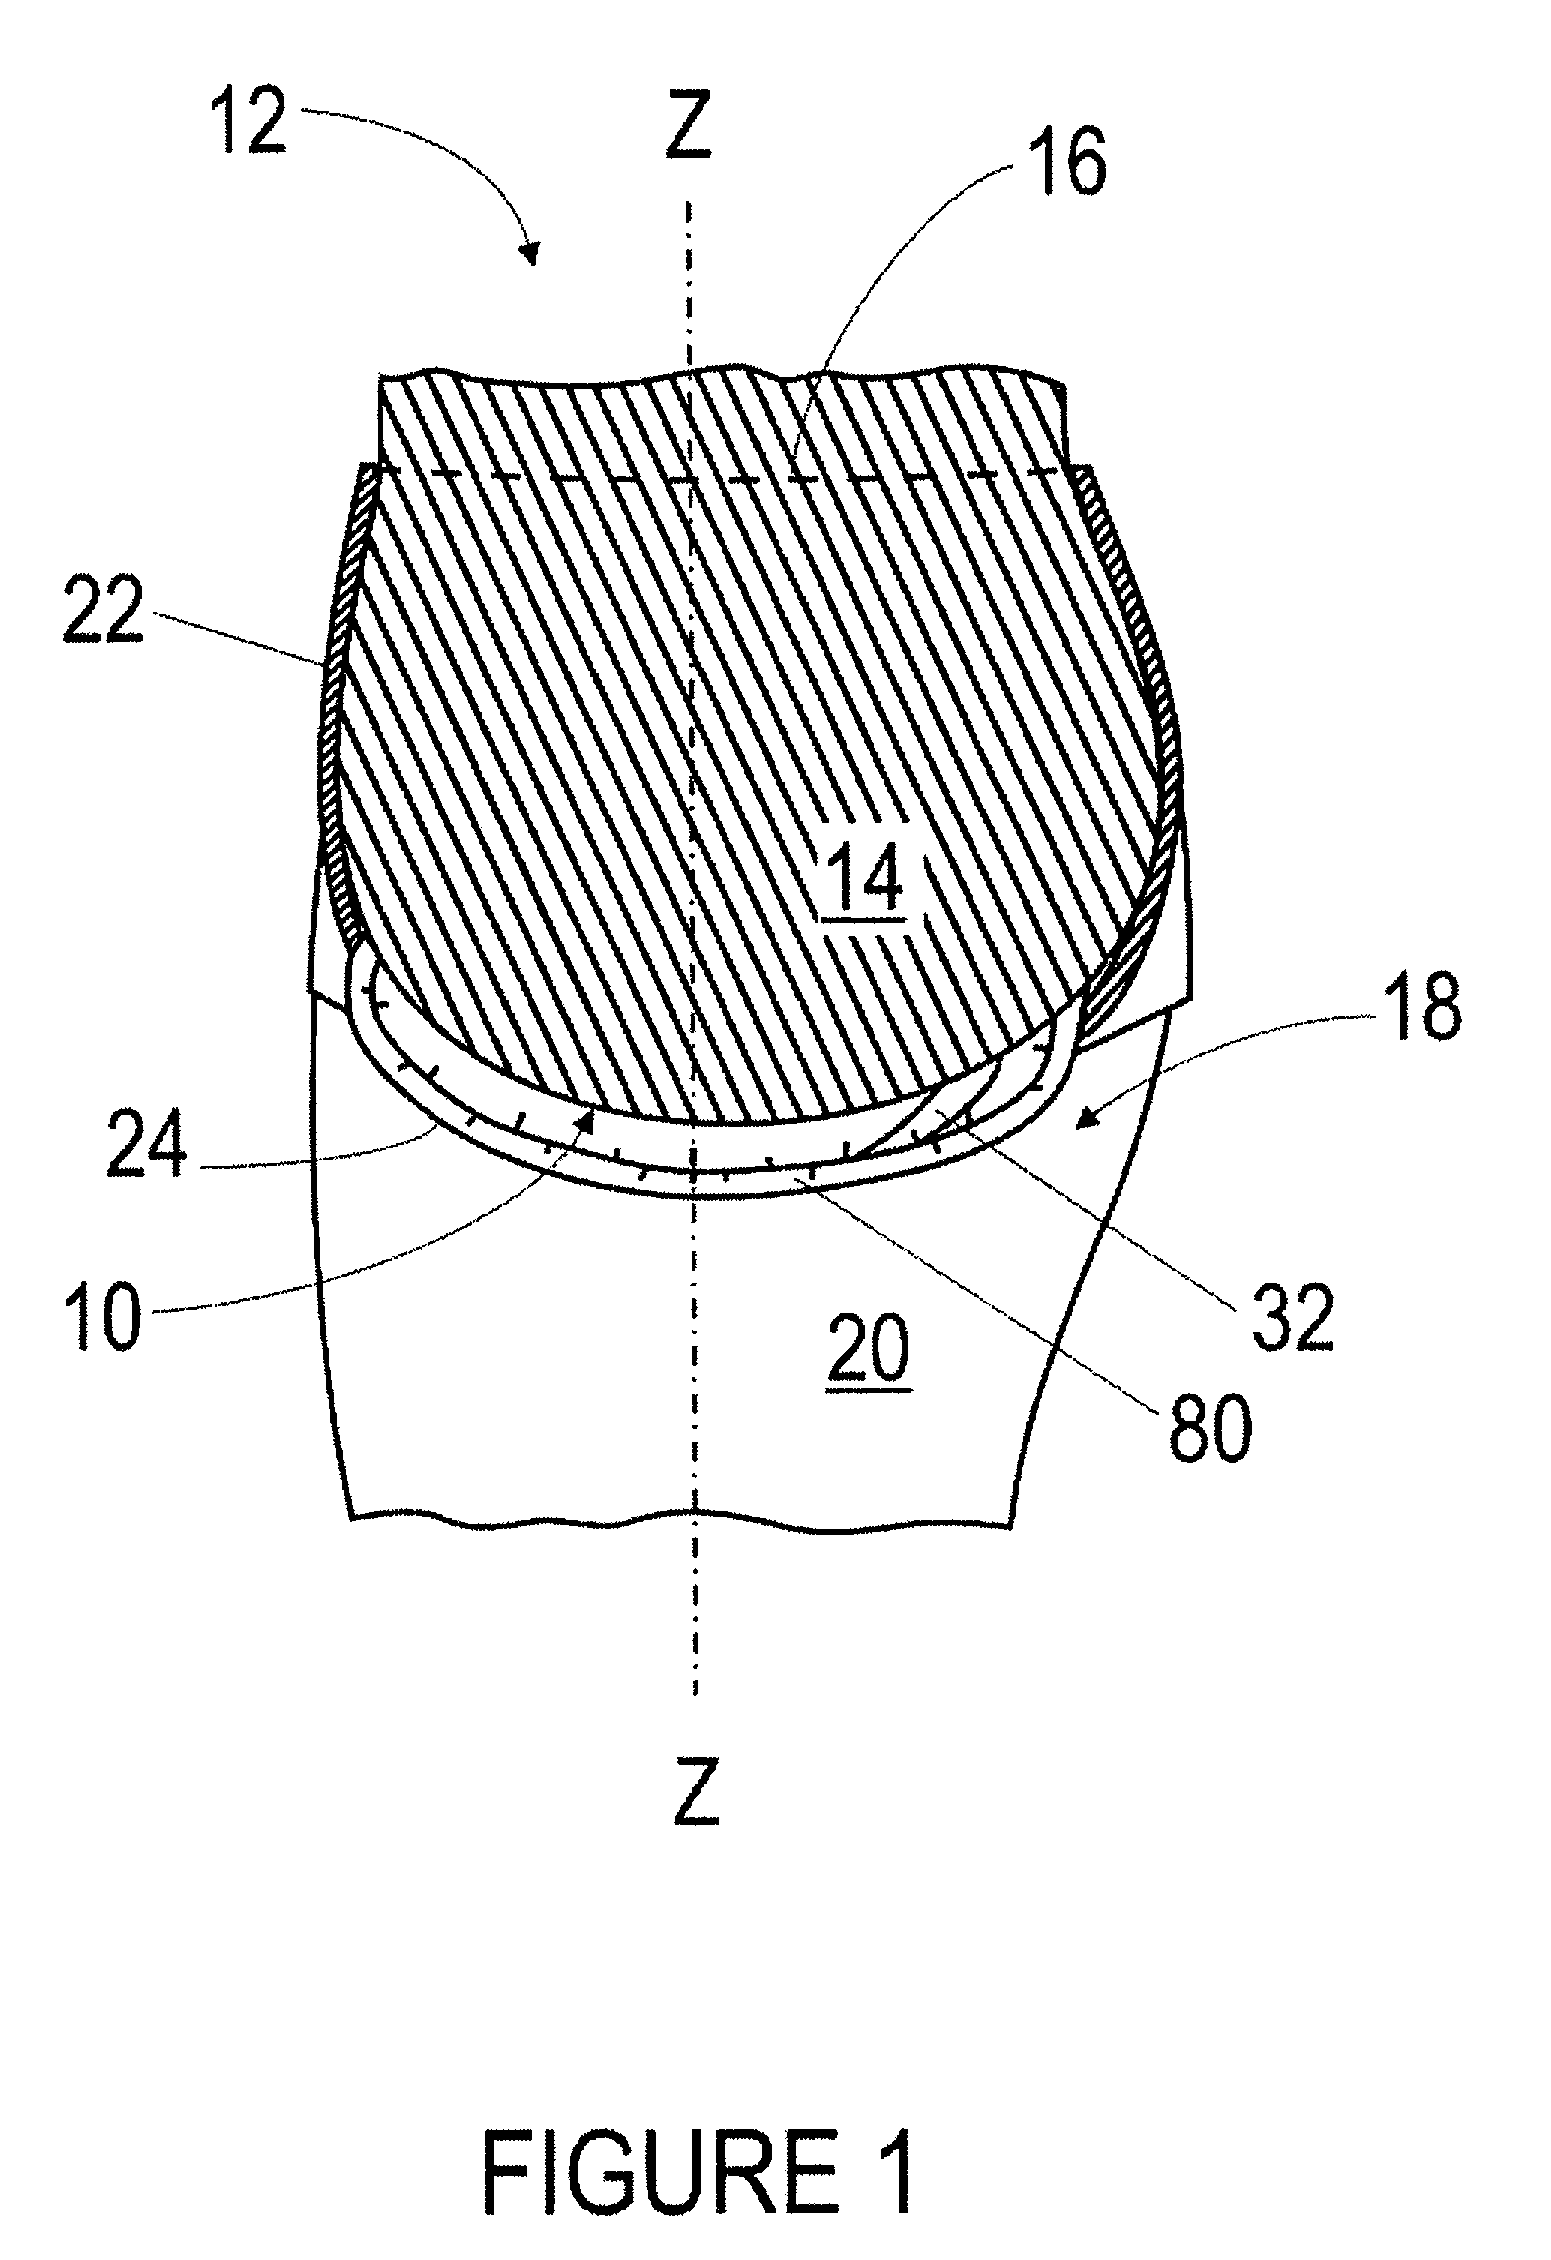 Combination pad and panty shield with raised channel